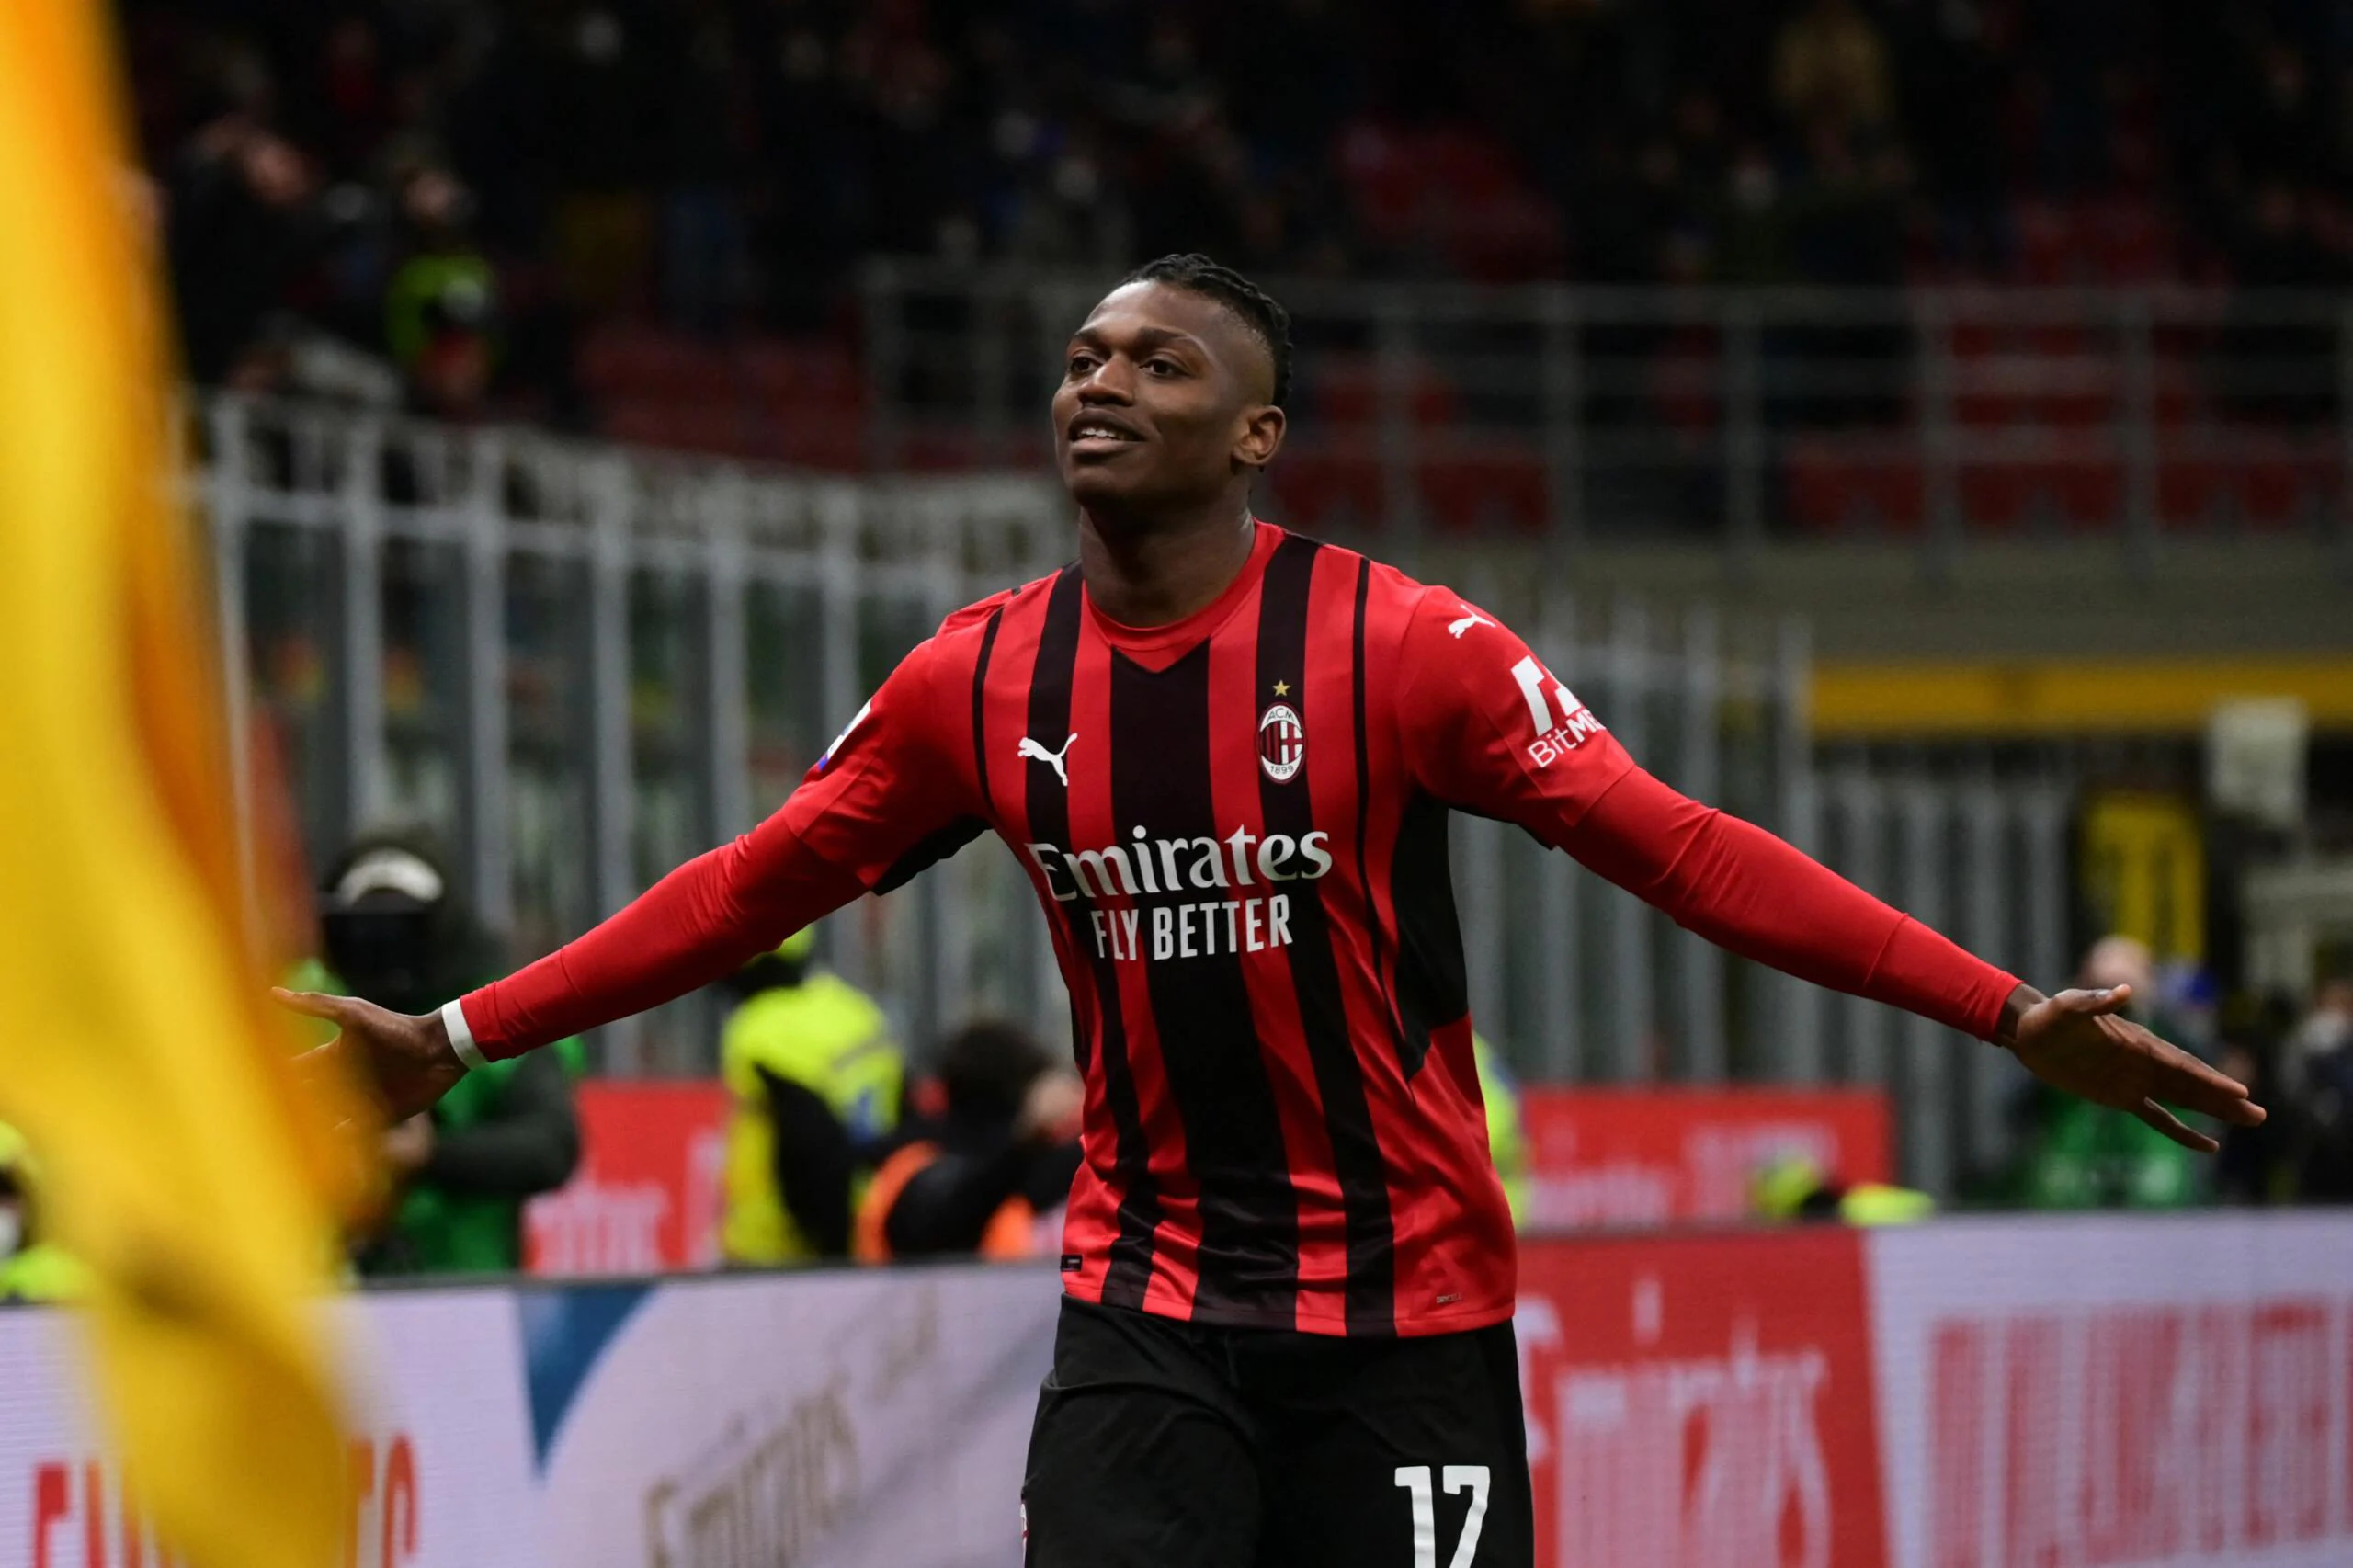 Director Paolo Maldini announced that Milan wanted to agree on an extension with Rafael Leao before the World Cup, and the club is indeed accelerating.